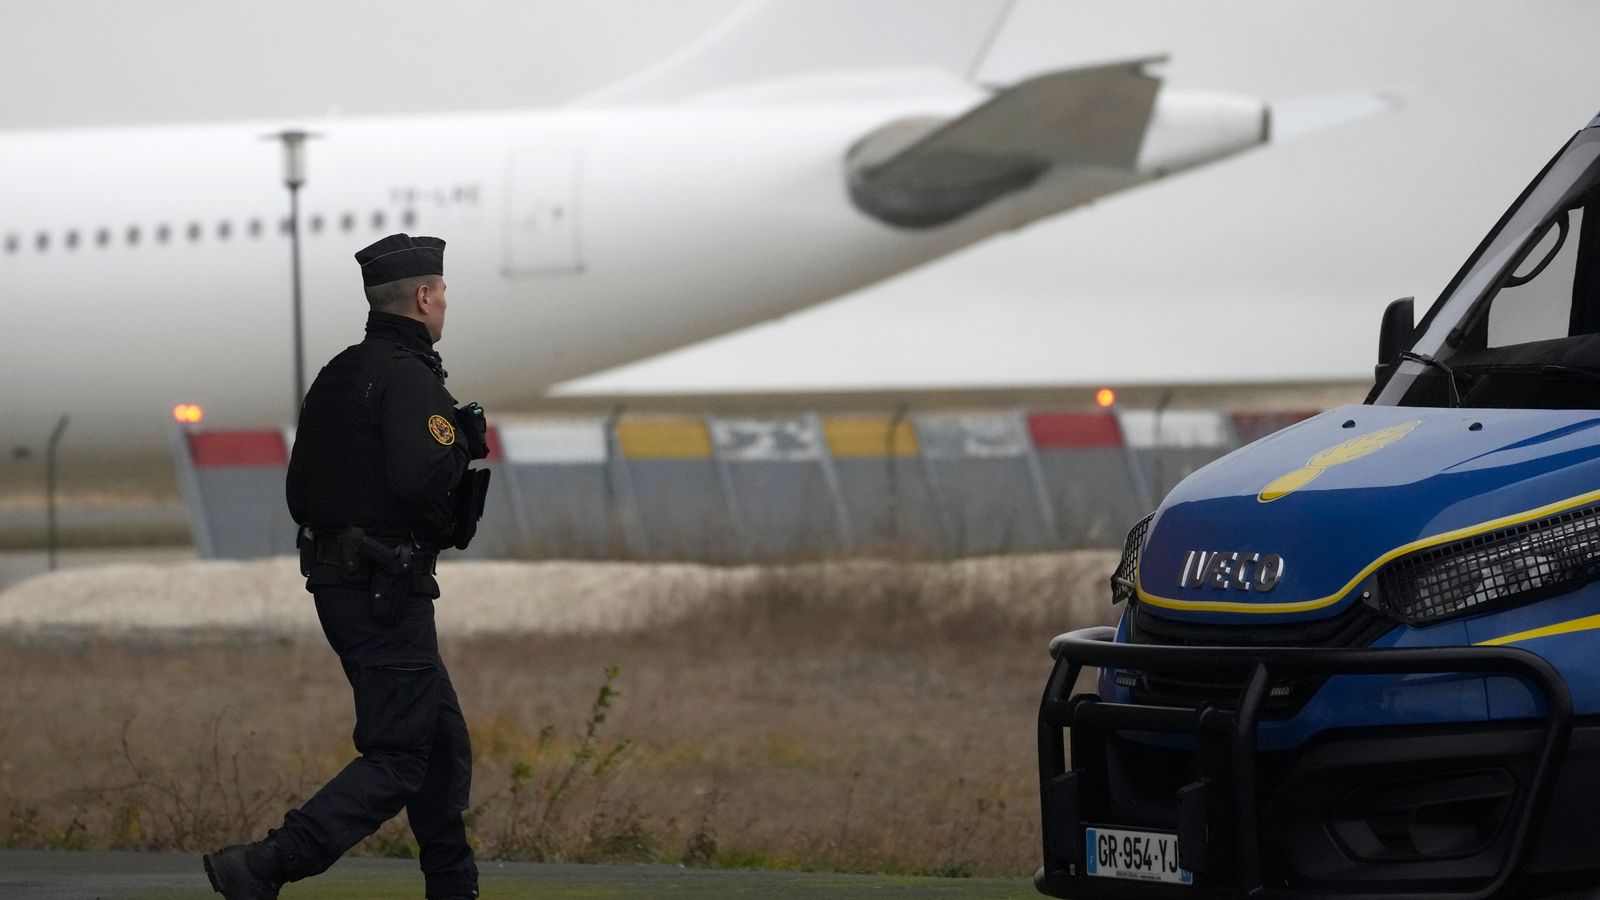 Flight carrying 300 Indian citizens grounded at French airport after tip-off passengers are human trafficking victims